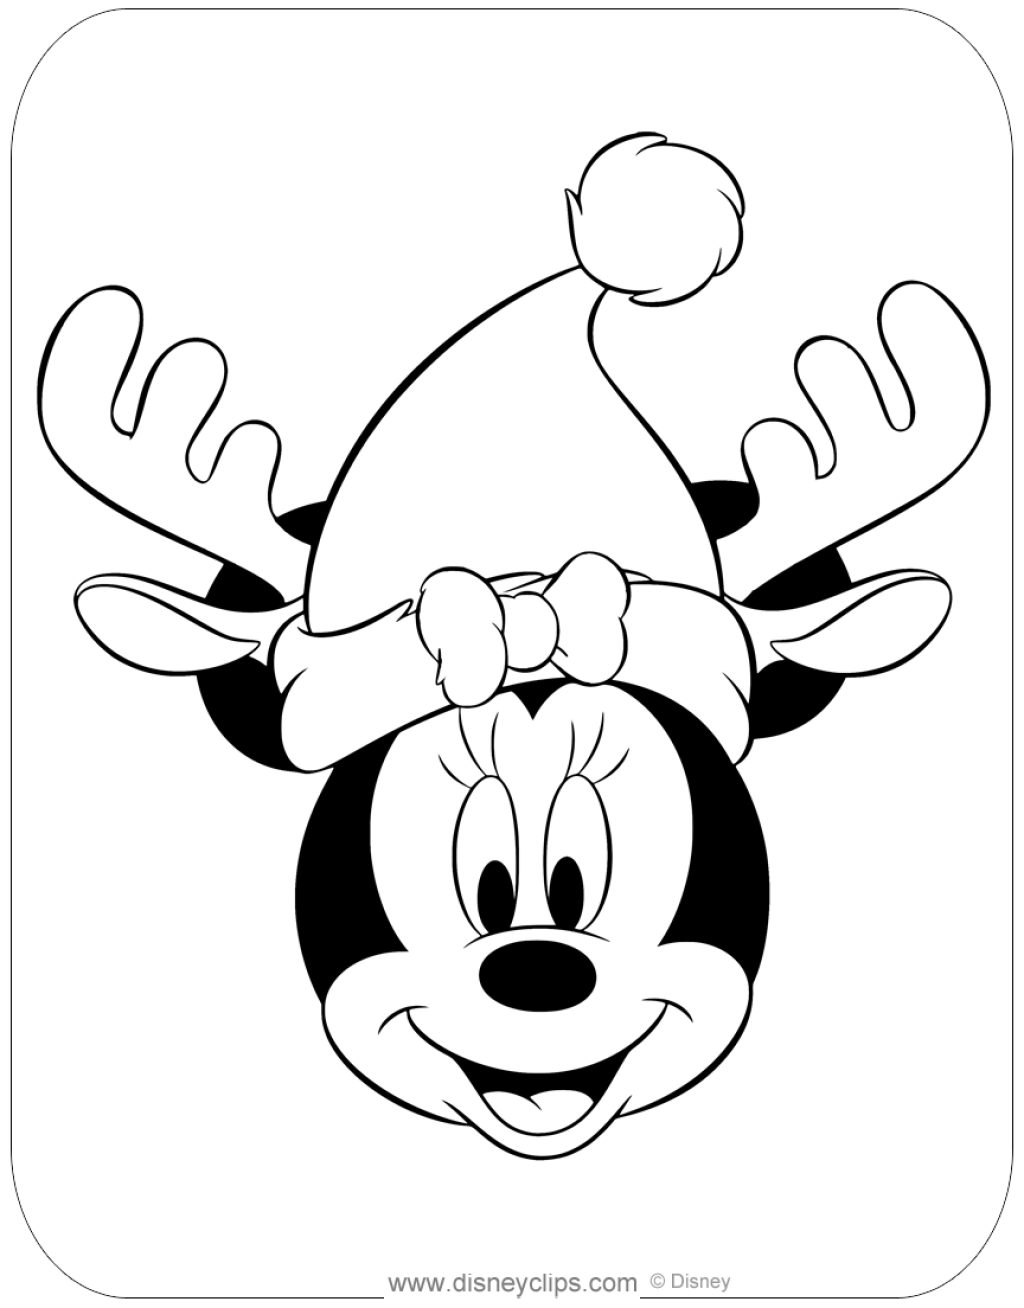 Picture of: Disney Christmas Coloring Pages  Disneyclips